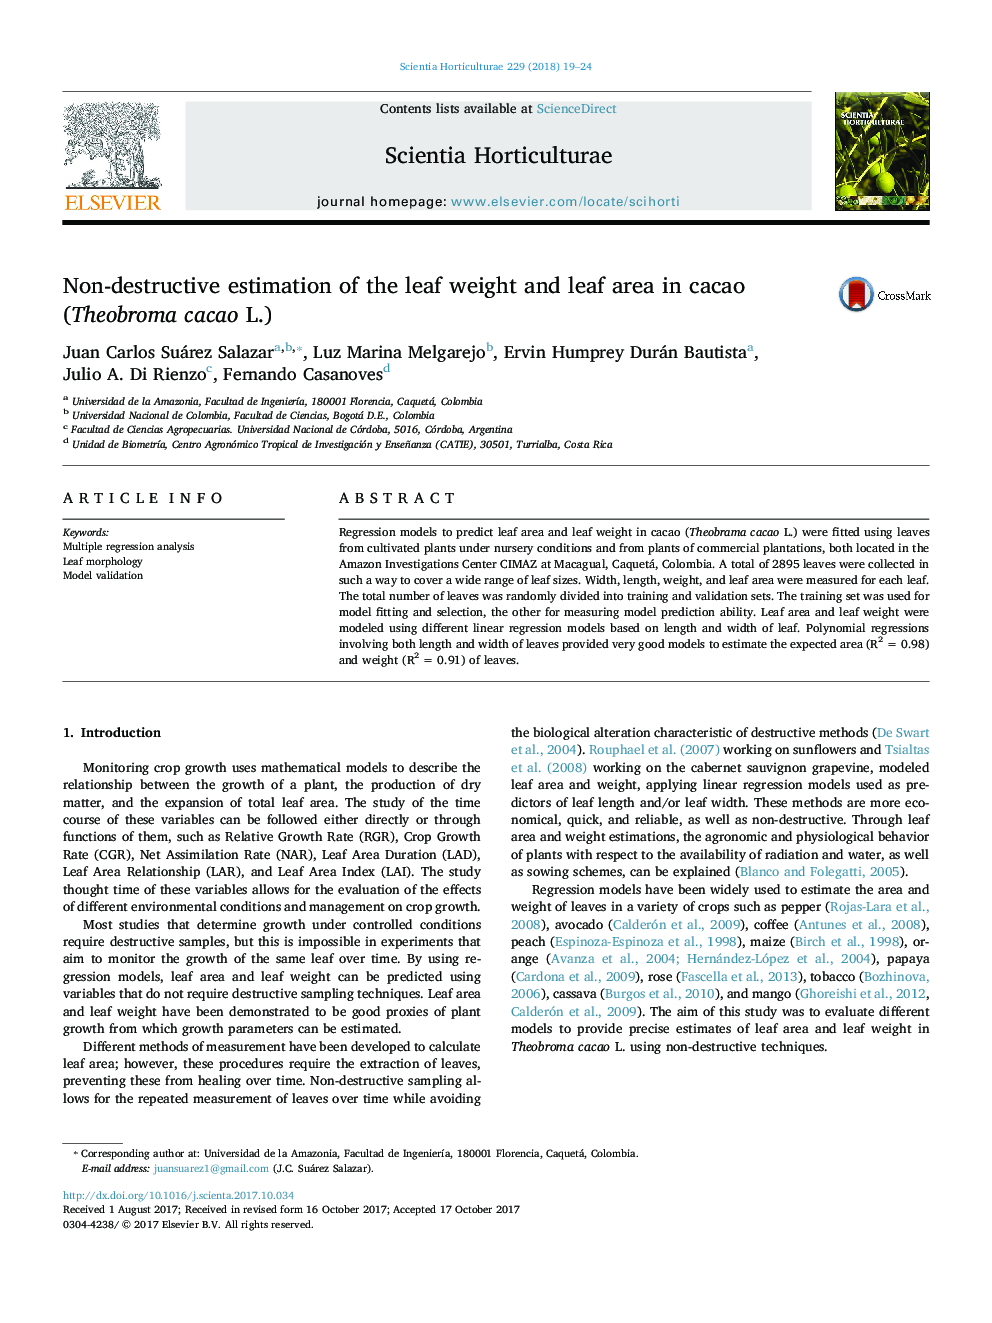 Non-destructive estimation of the leaf weight and leaf area in cacao (Theobroma cacao L.)